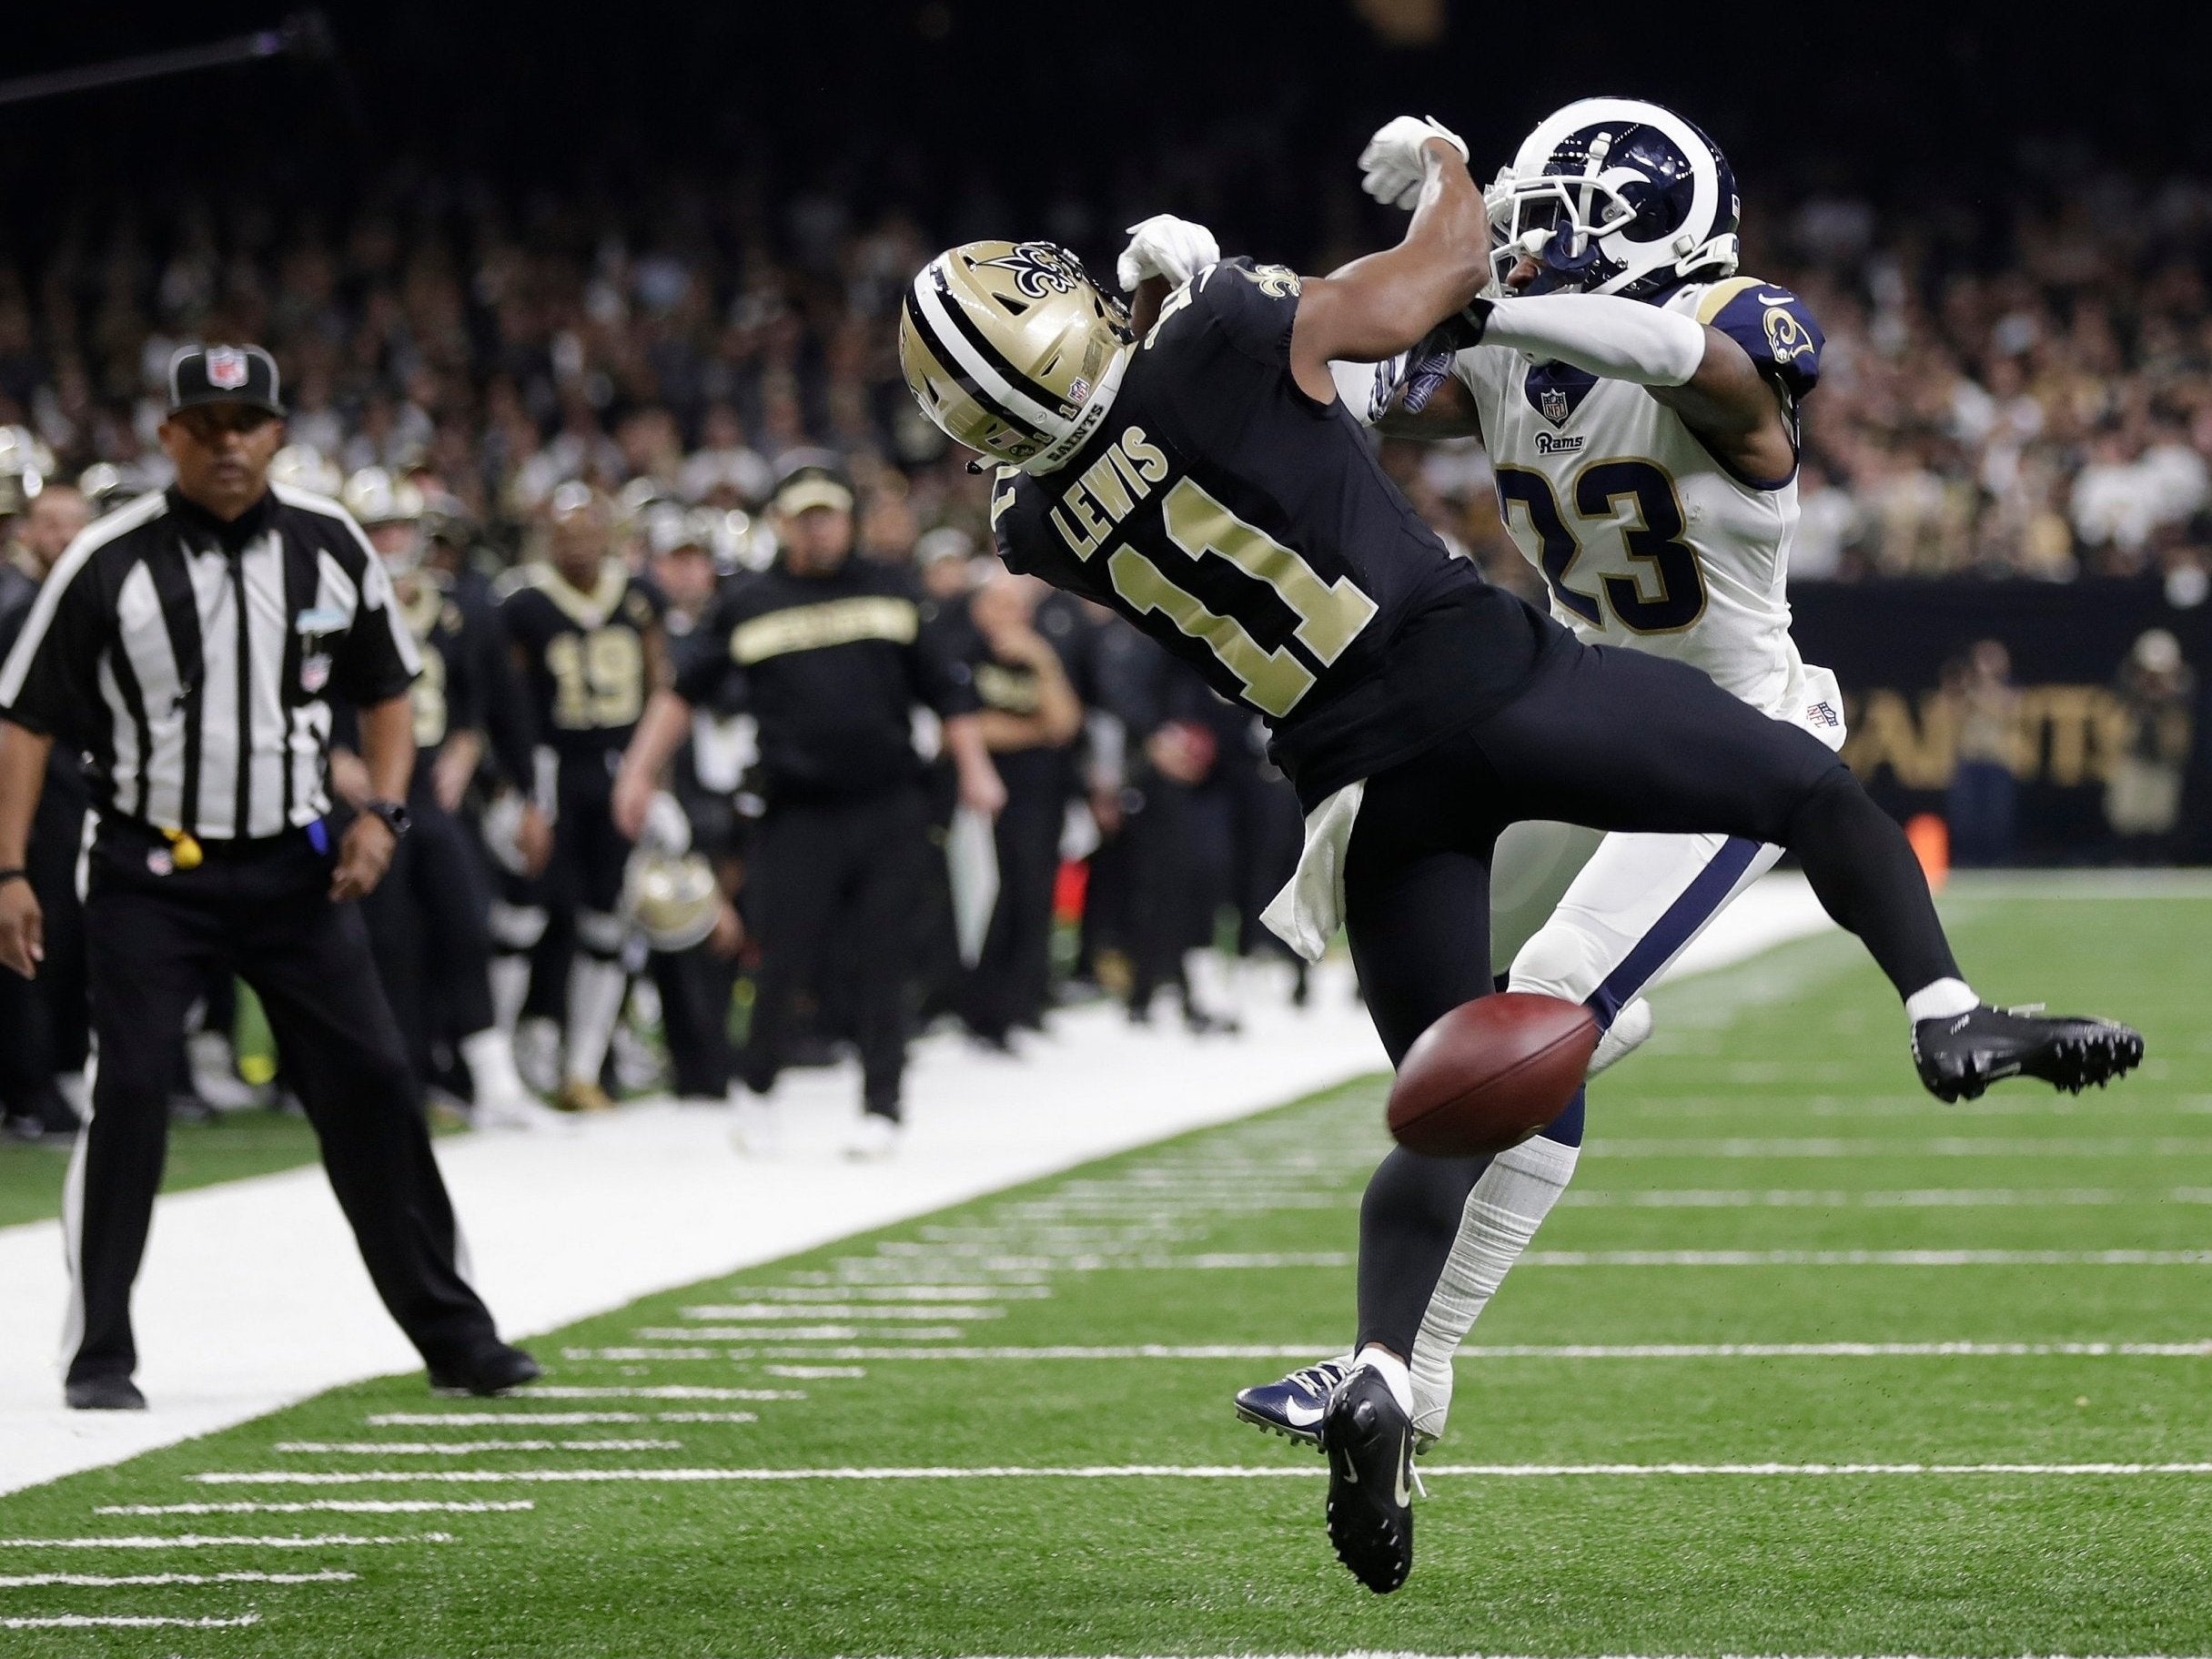 The no-call in the NFC title game brought about a radical change in the rules